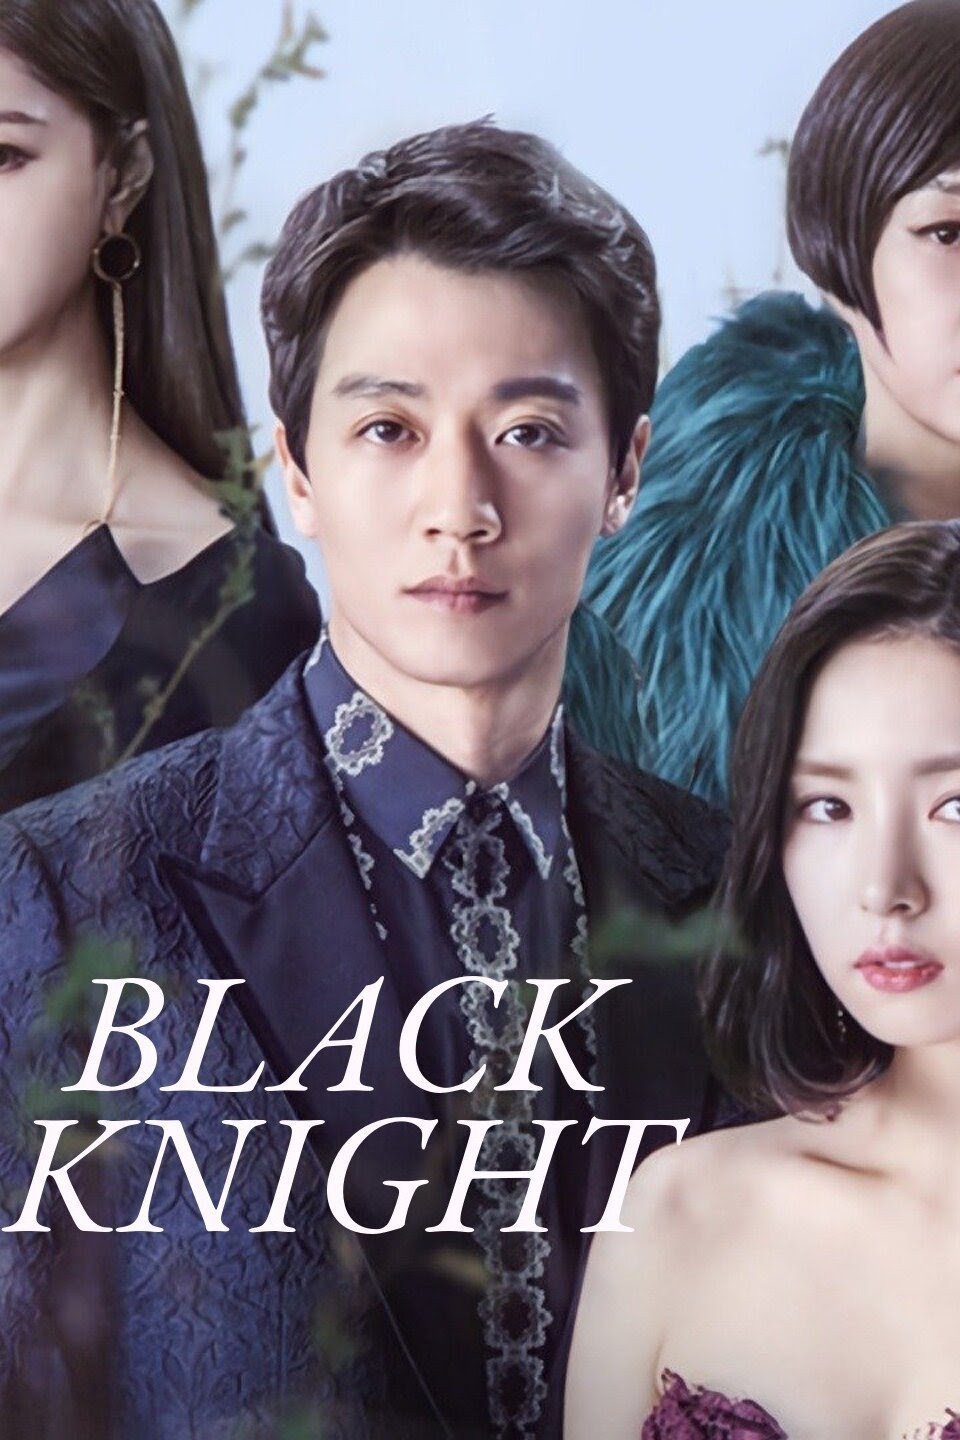 Black Knight: The Man Who Guards Me 2017